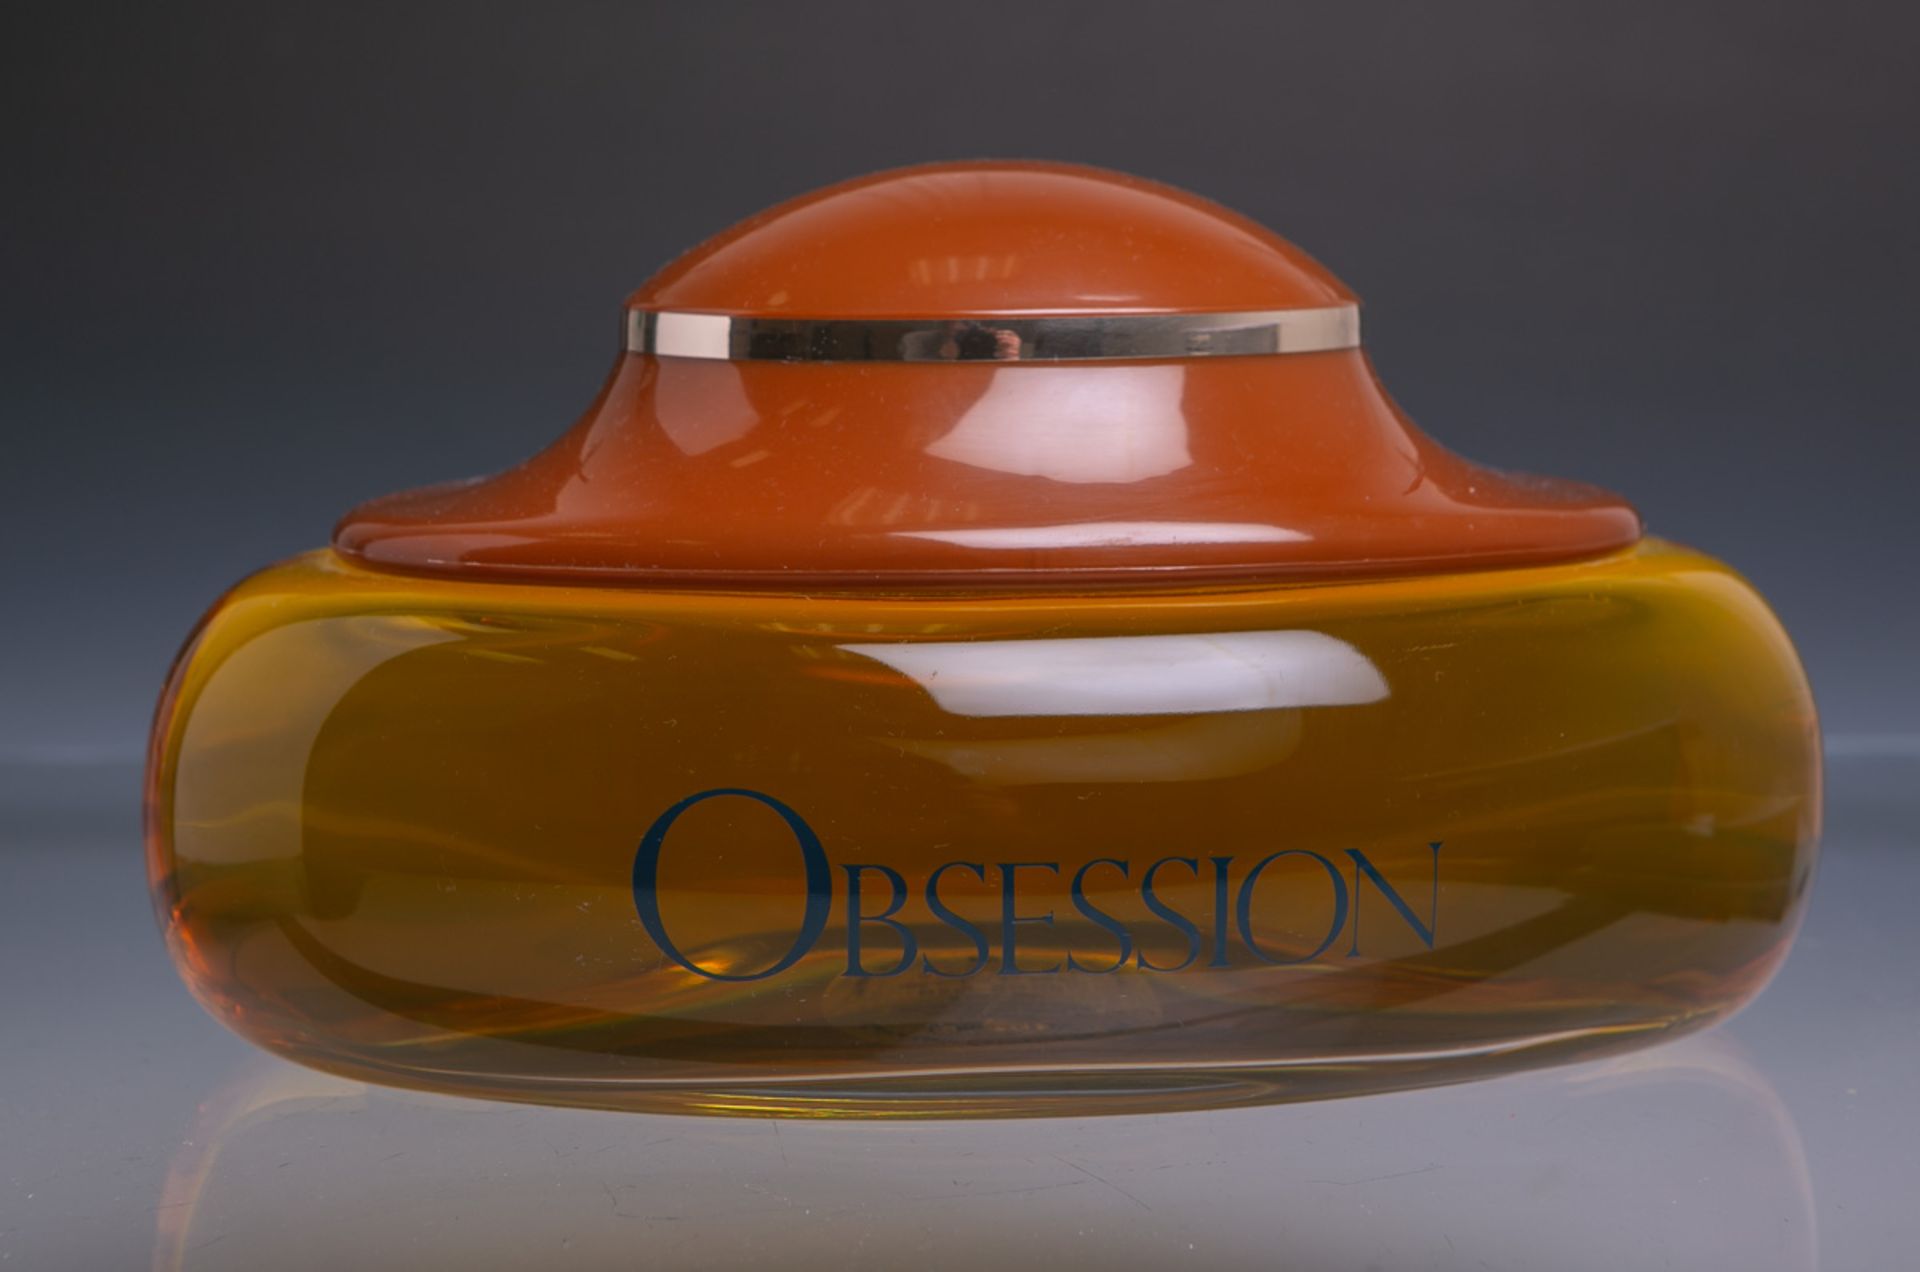 Gross-Factice "Obsession" (Calvin Klein Cosmetics) - Image 2 of 2